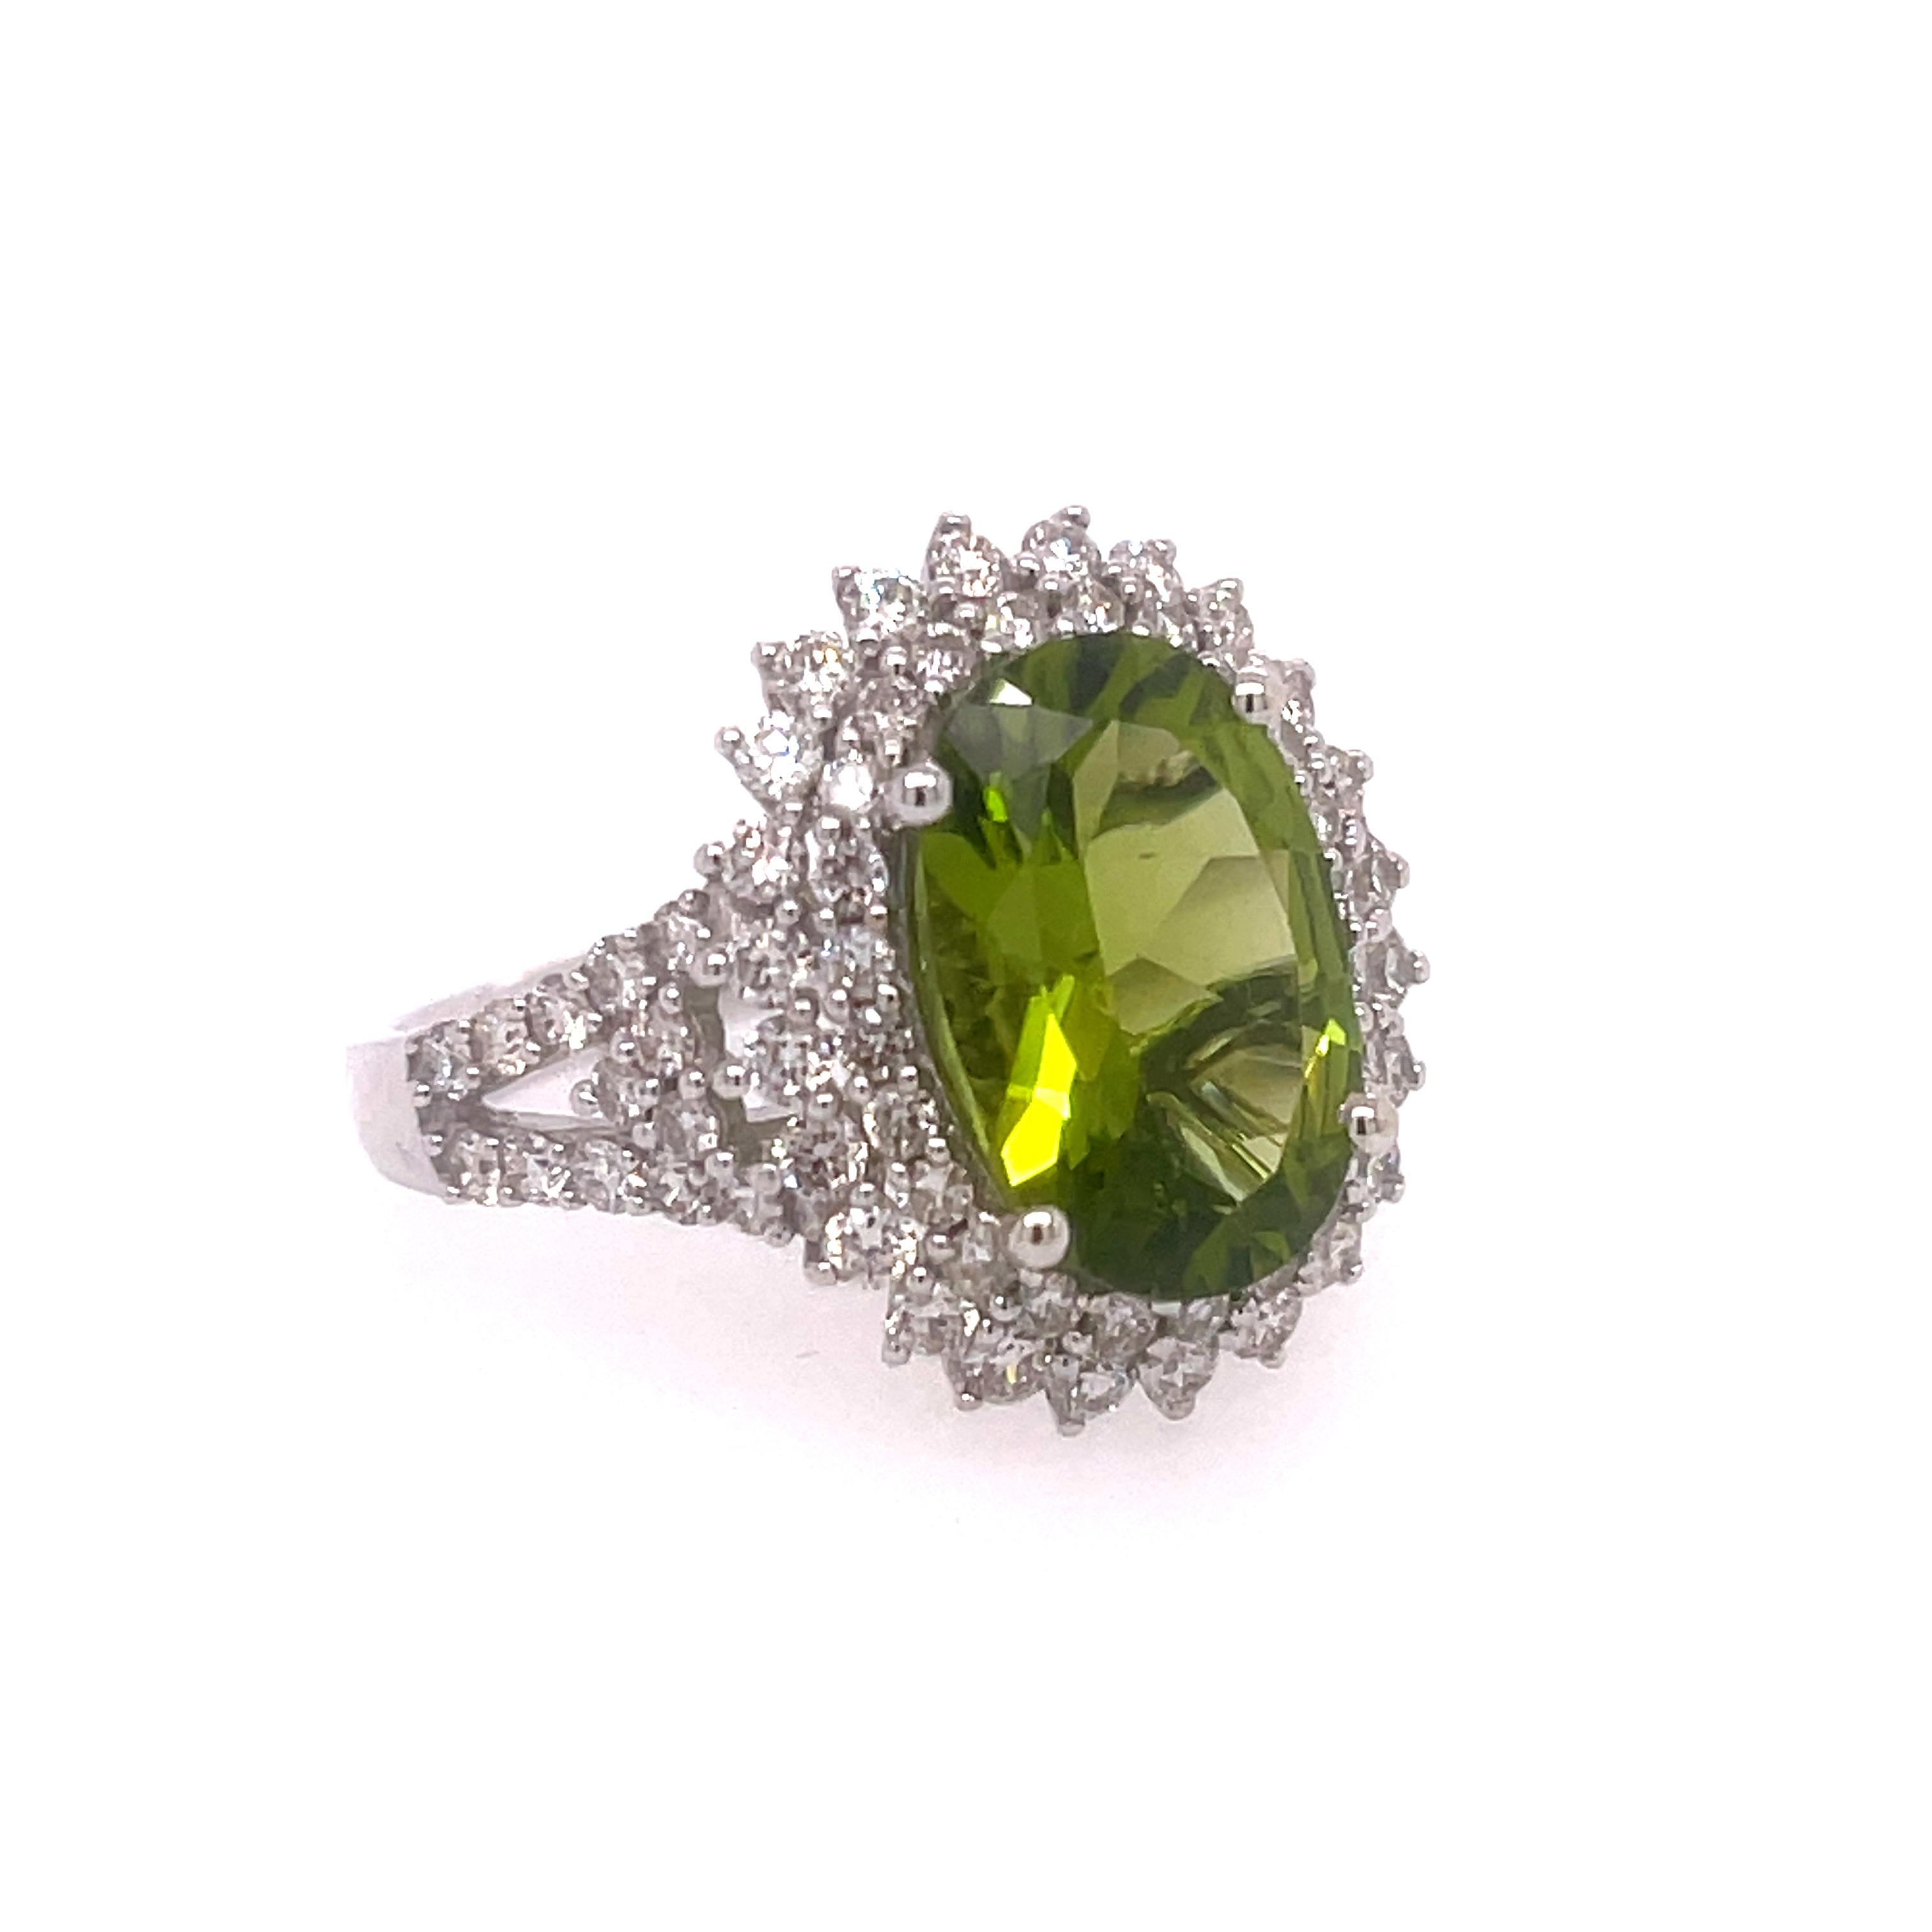 Peridot and Diamond Ring in 14K White Gold.  Peridot is 4.23ct and Diamonds are 1.26.  Size 7.5.  Super shiny faceted Peridot sparkles to the moon and back.  Total weight is 5.2 Grams.  Stamped JH 14K PD4.23CT.